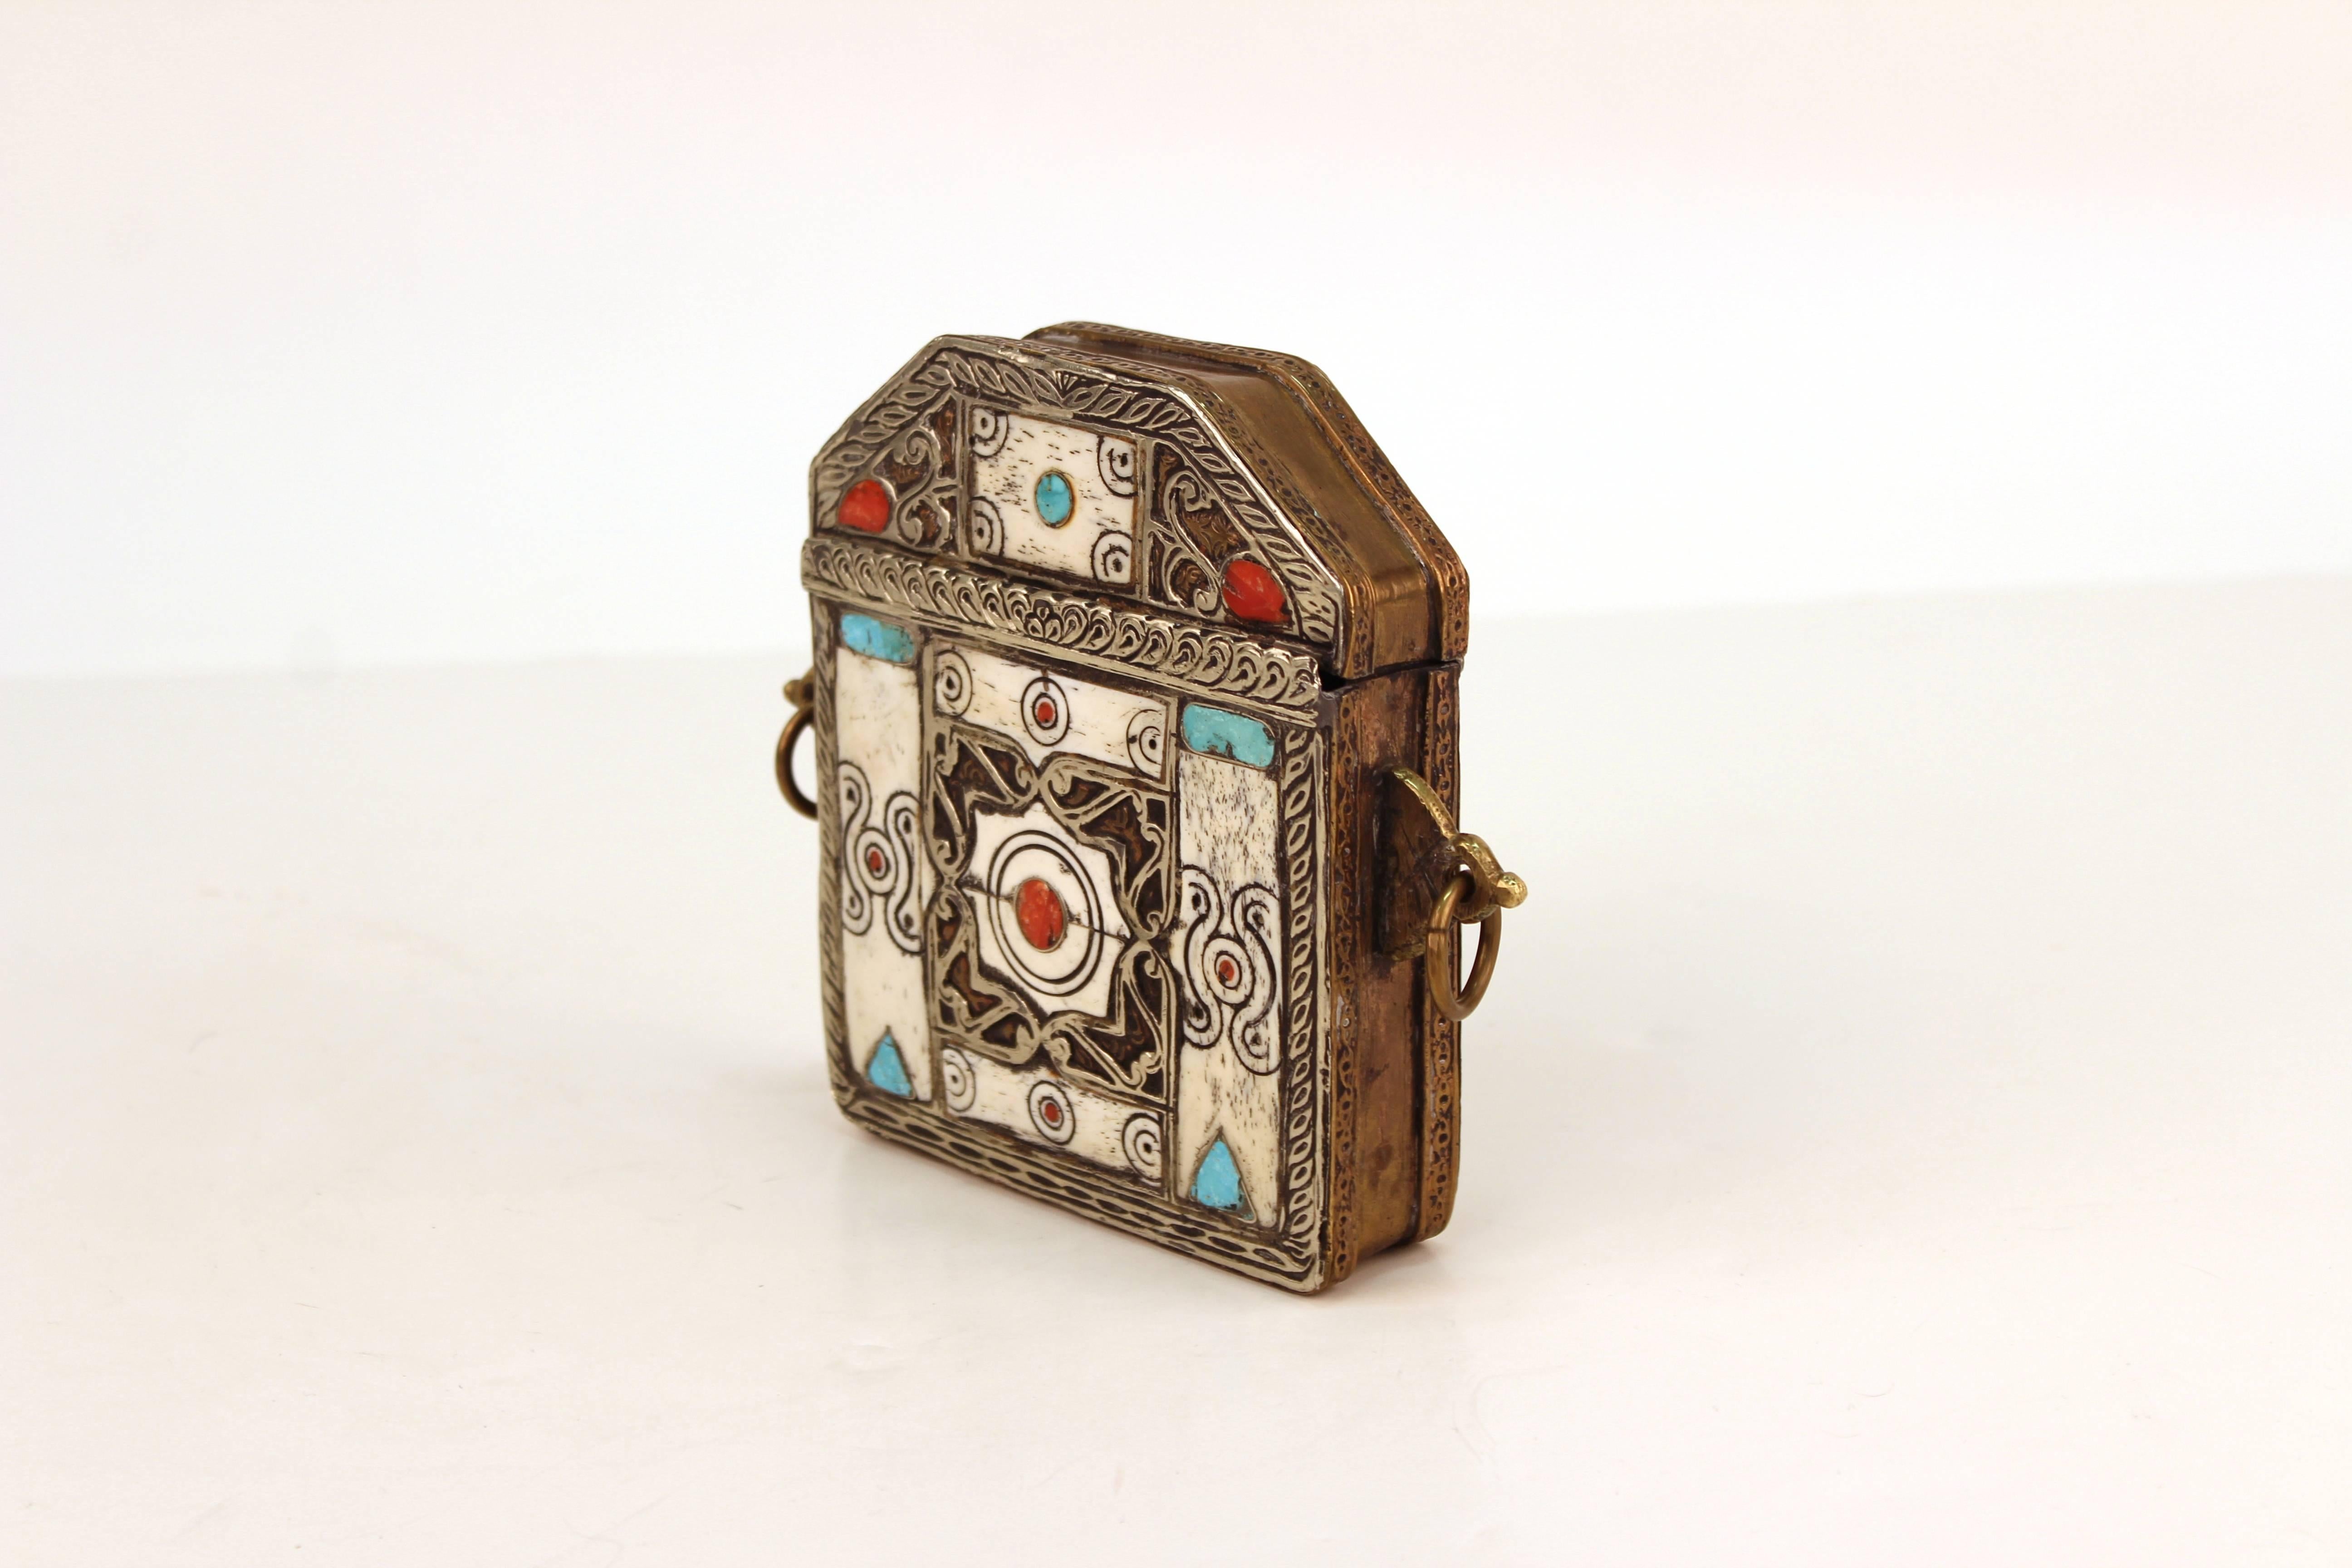 Koran box likely from North Africa. Crafted in mixed metal with brass and silver tones. Decorated with bone, coral and turquoise. Wear appropriate to use and material. The piece is in good condition.